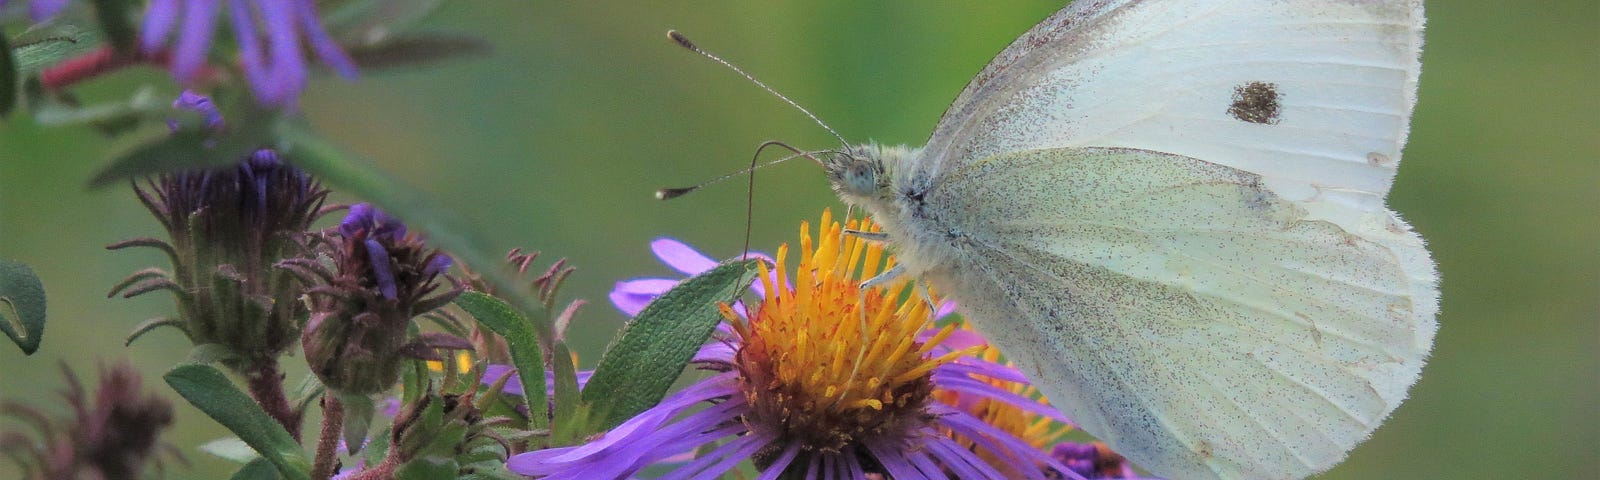 A white cabbage butterfly sipping nectar from a purple aster.